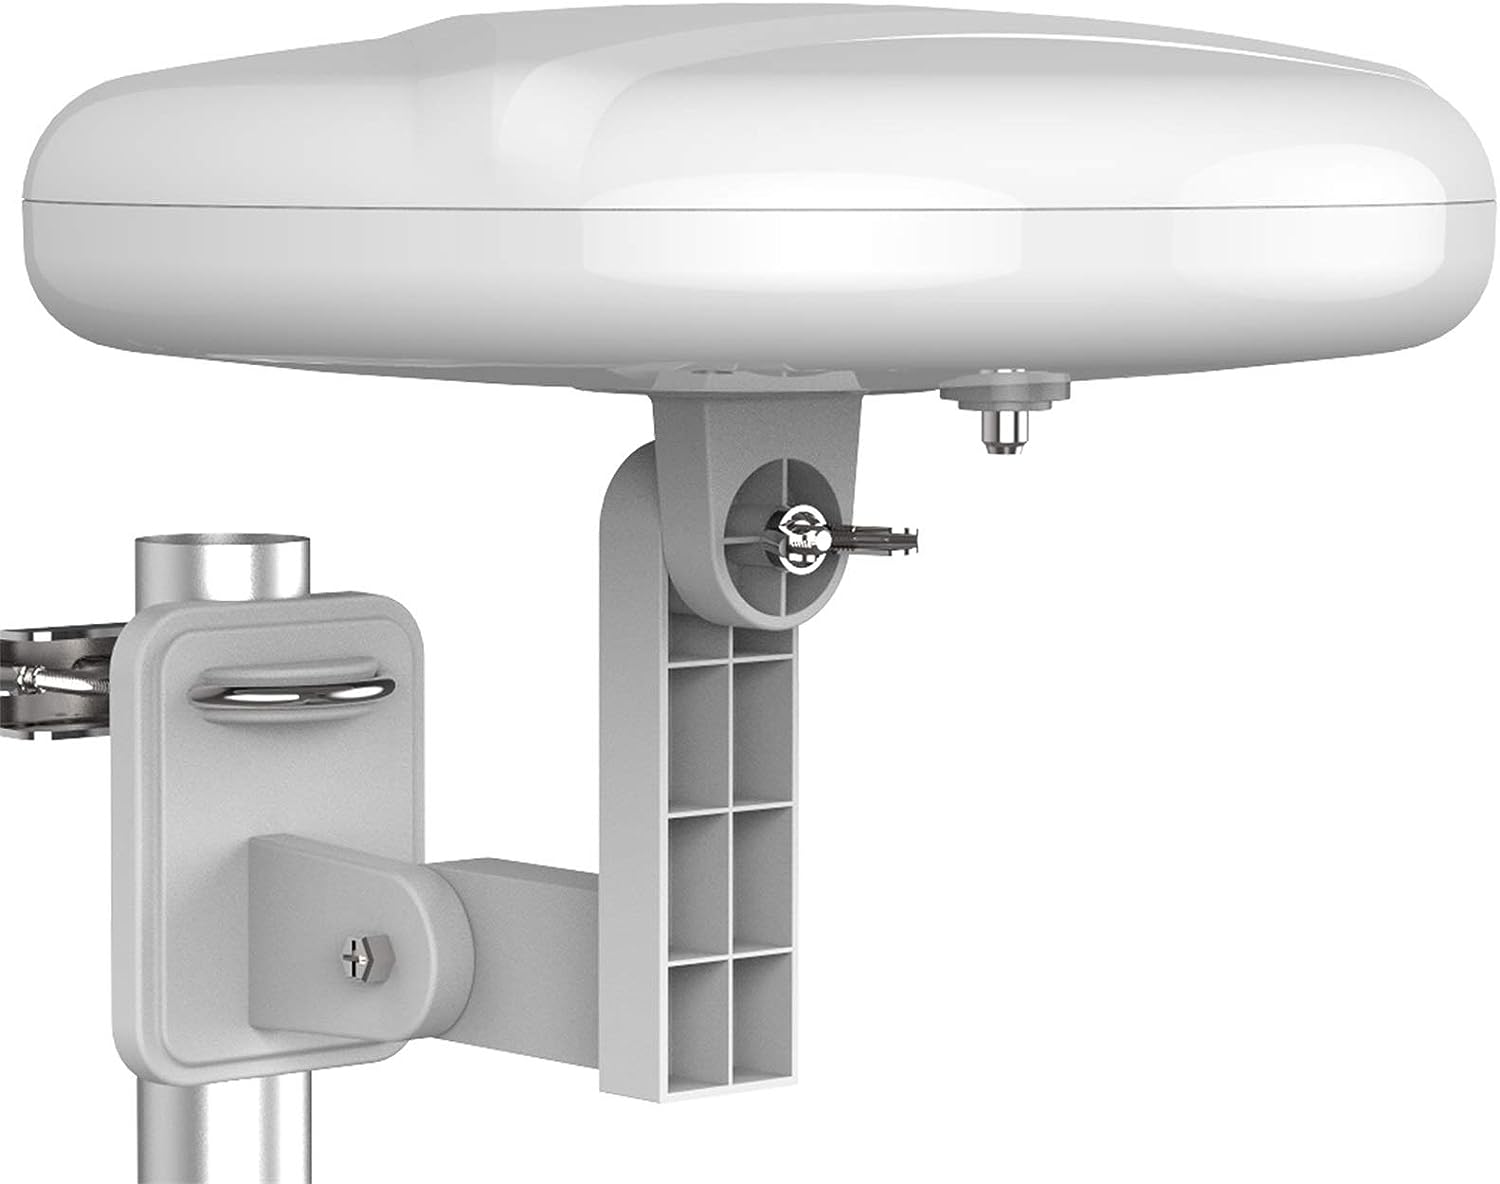 attic mounted hdtv antenna detailed review